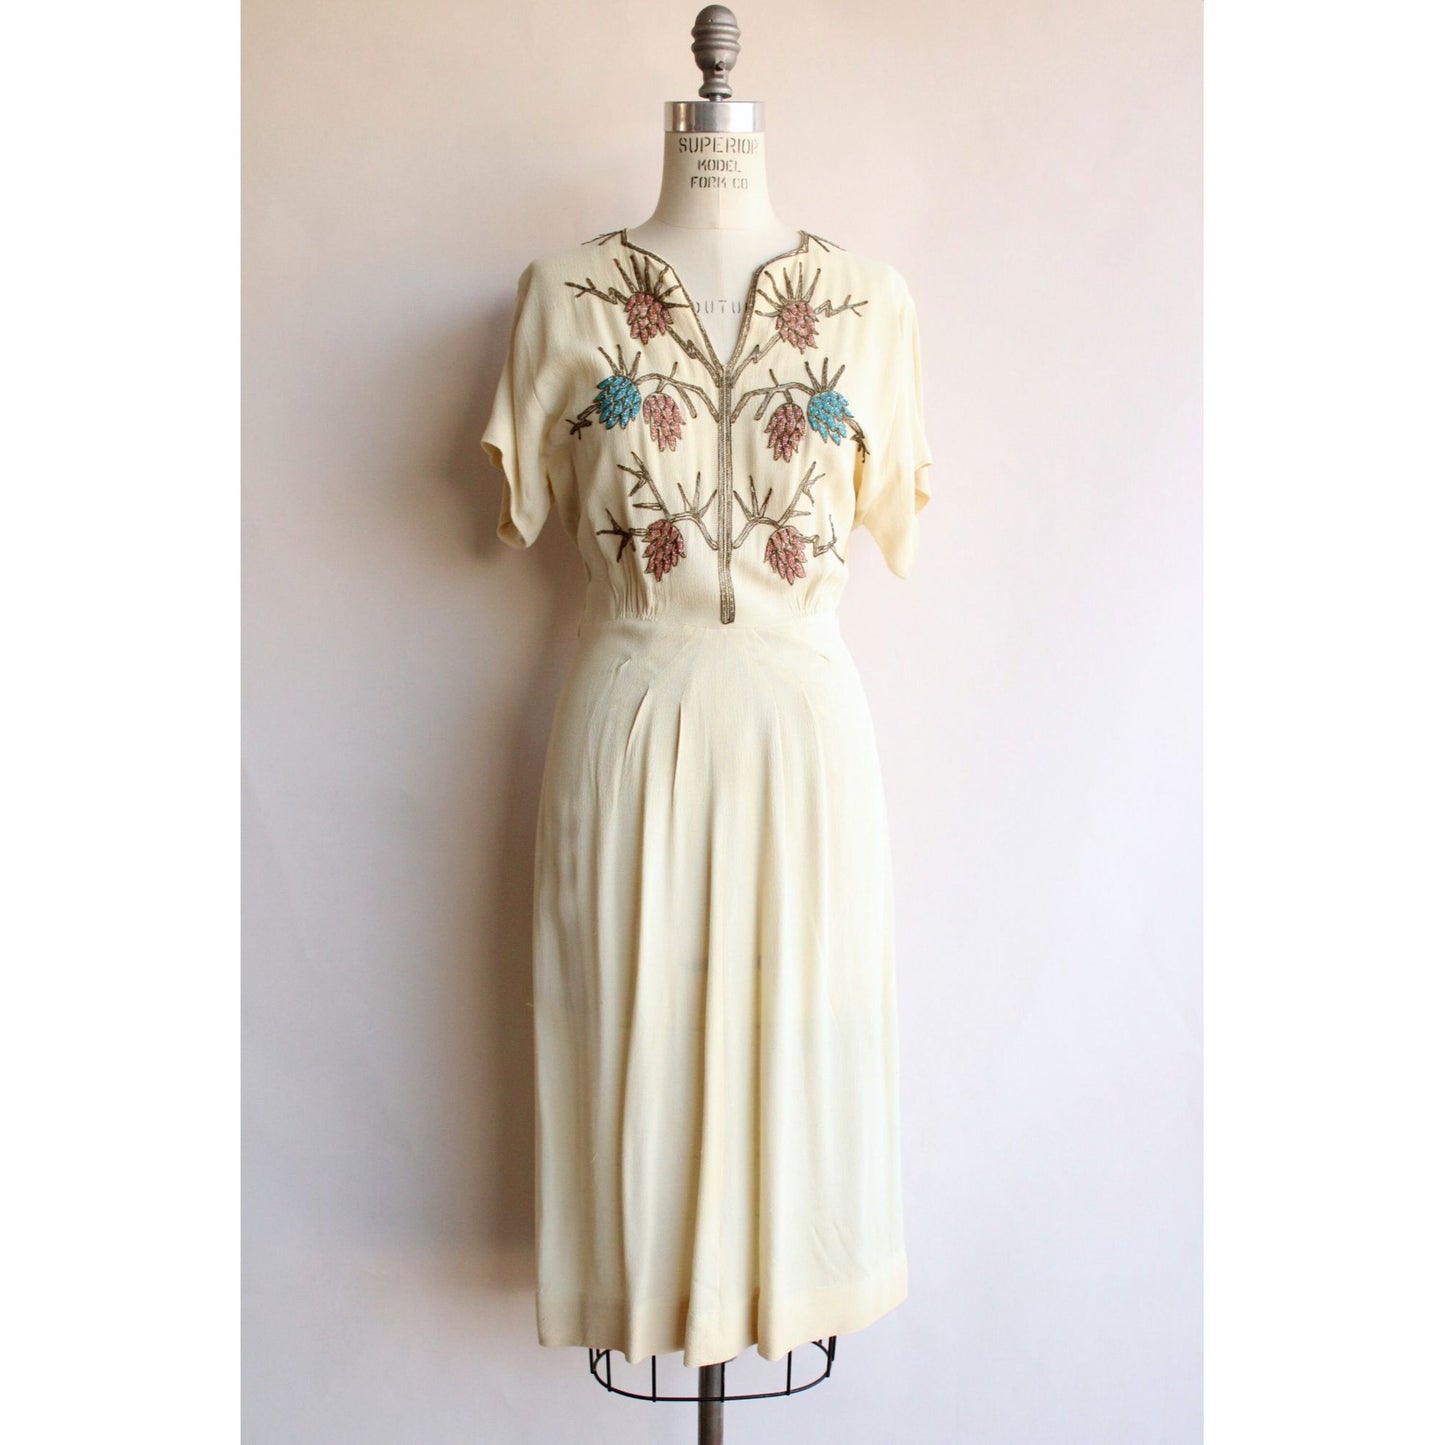 Vintage 1940s Best & Co Rayon Cream Dress with Beaded Bodice